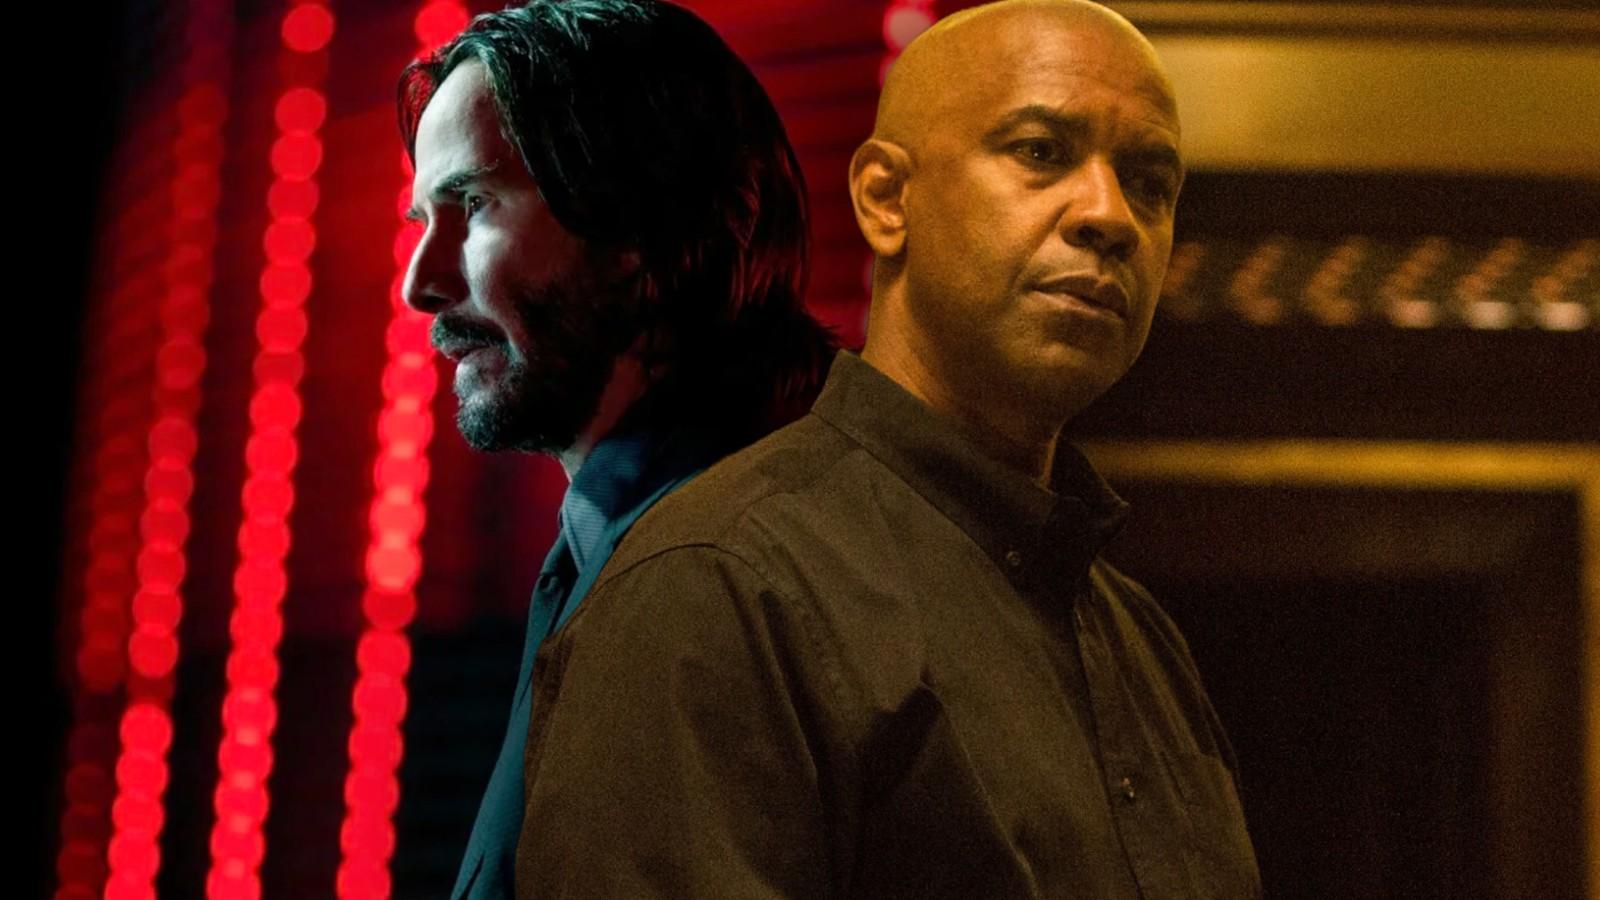 John Wick and Denzel Washington in The Equalizer